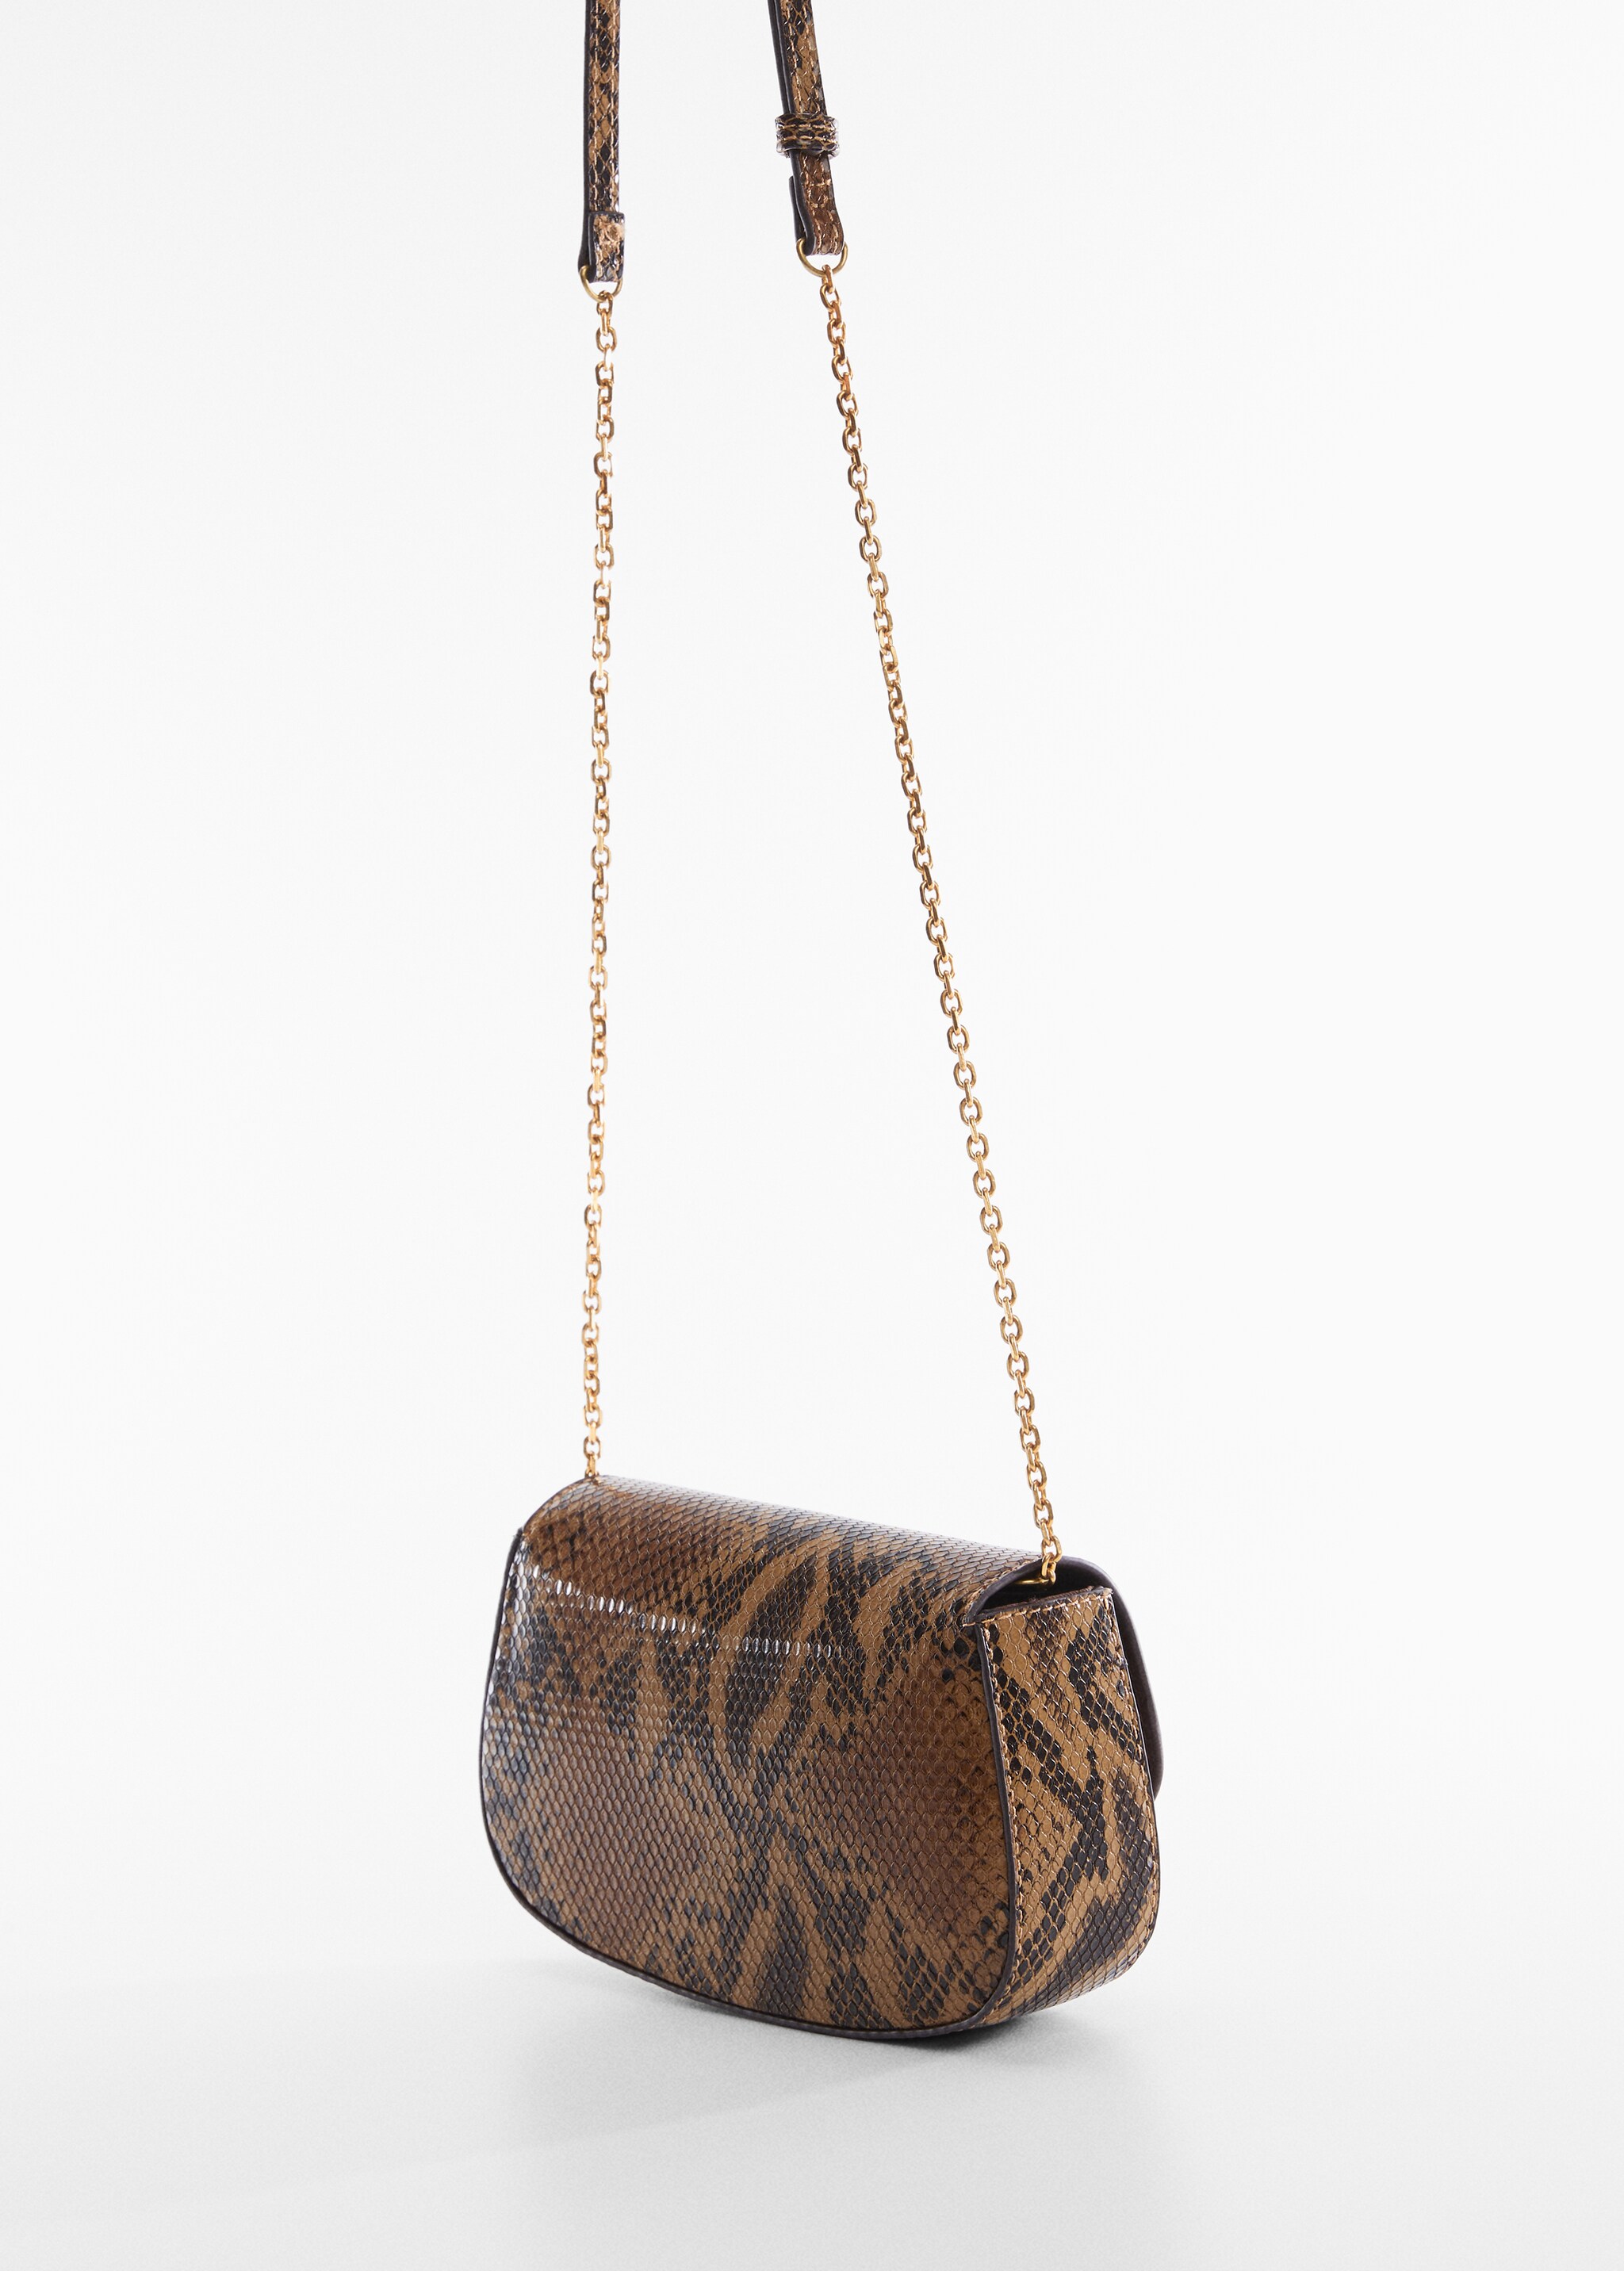 Flap chain bag - Details of the article 1